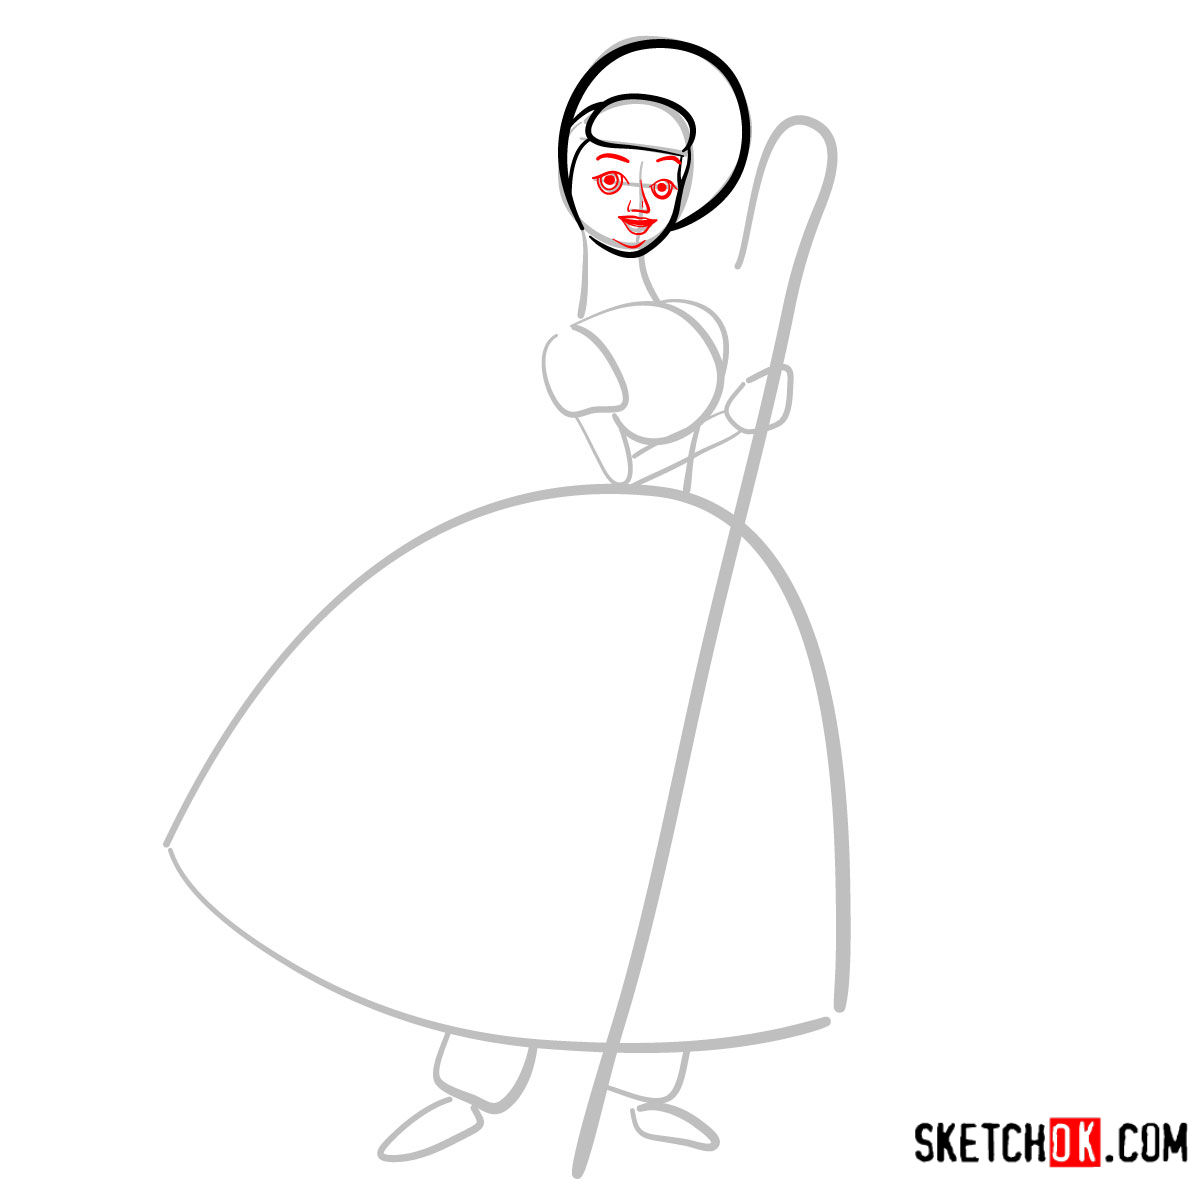 How to draw Bo Peep from Toy Story - step 04